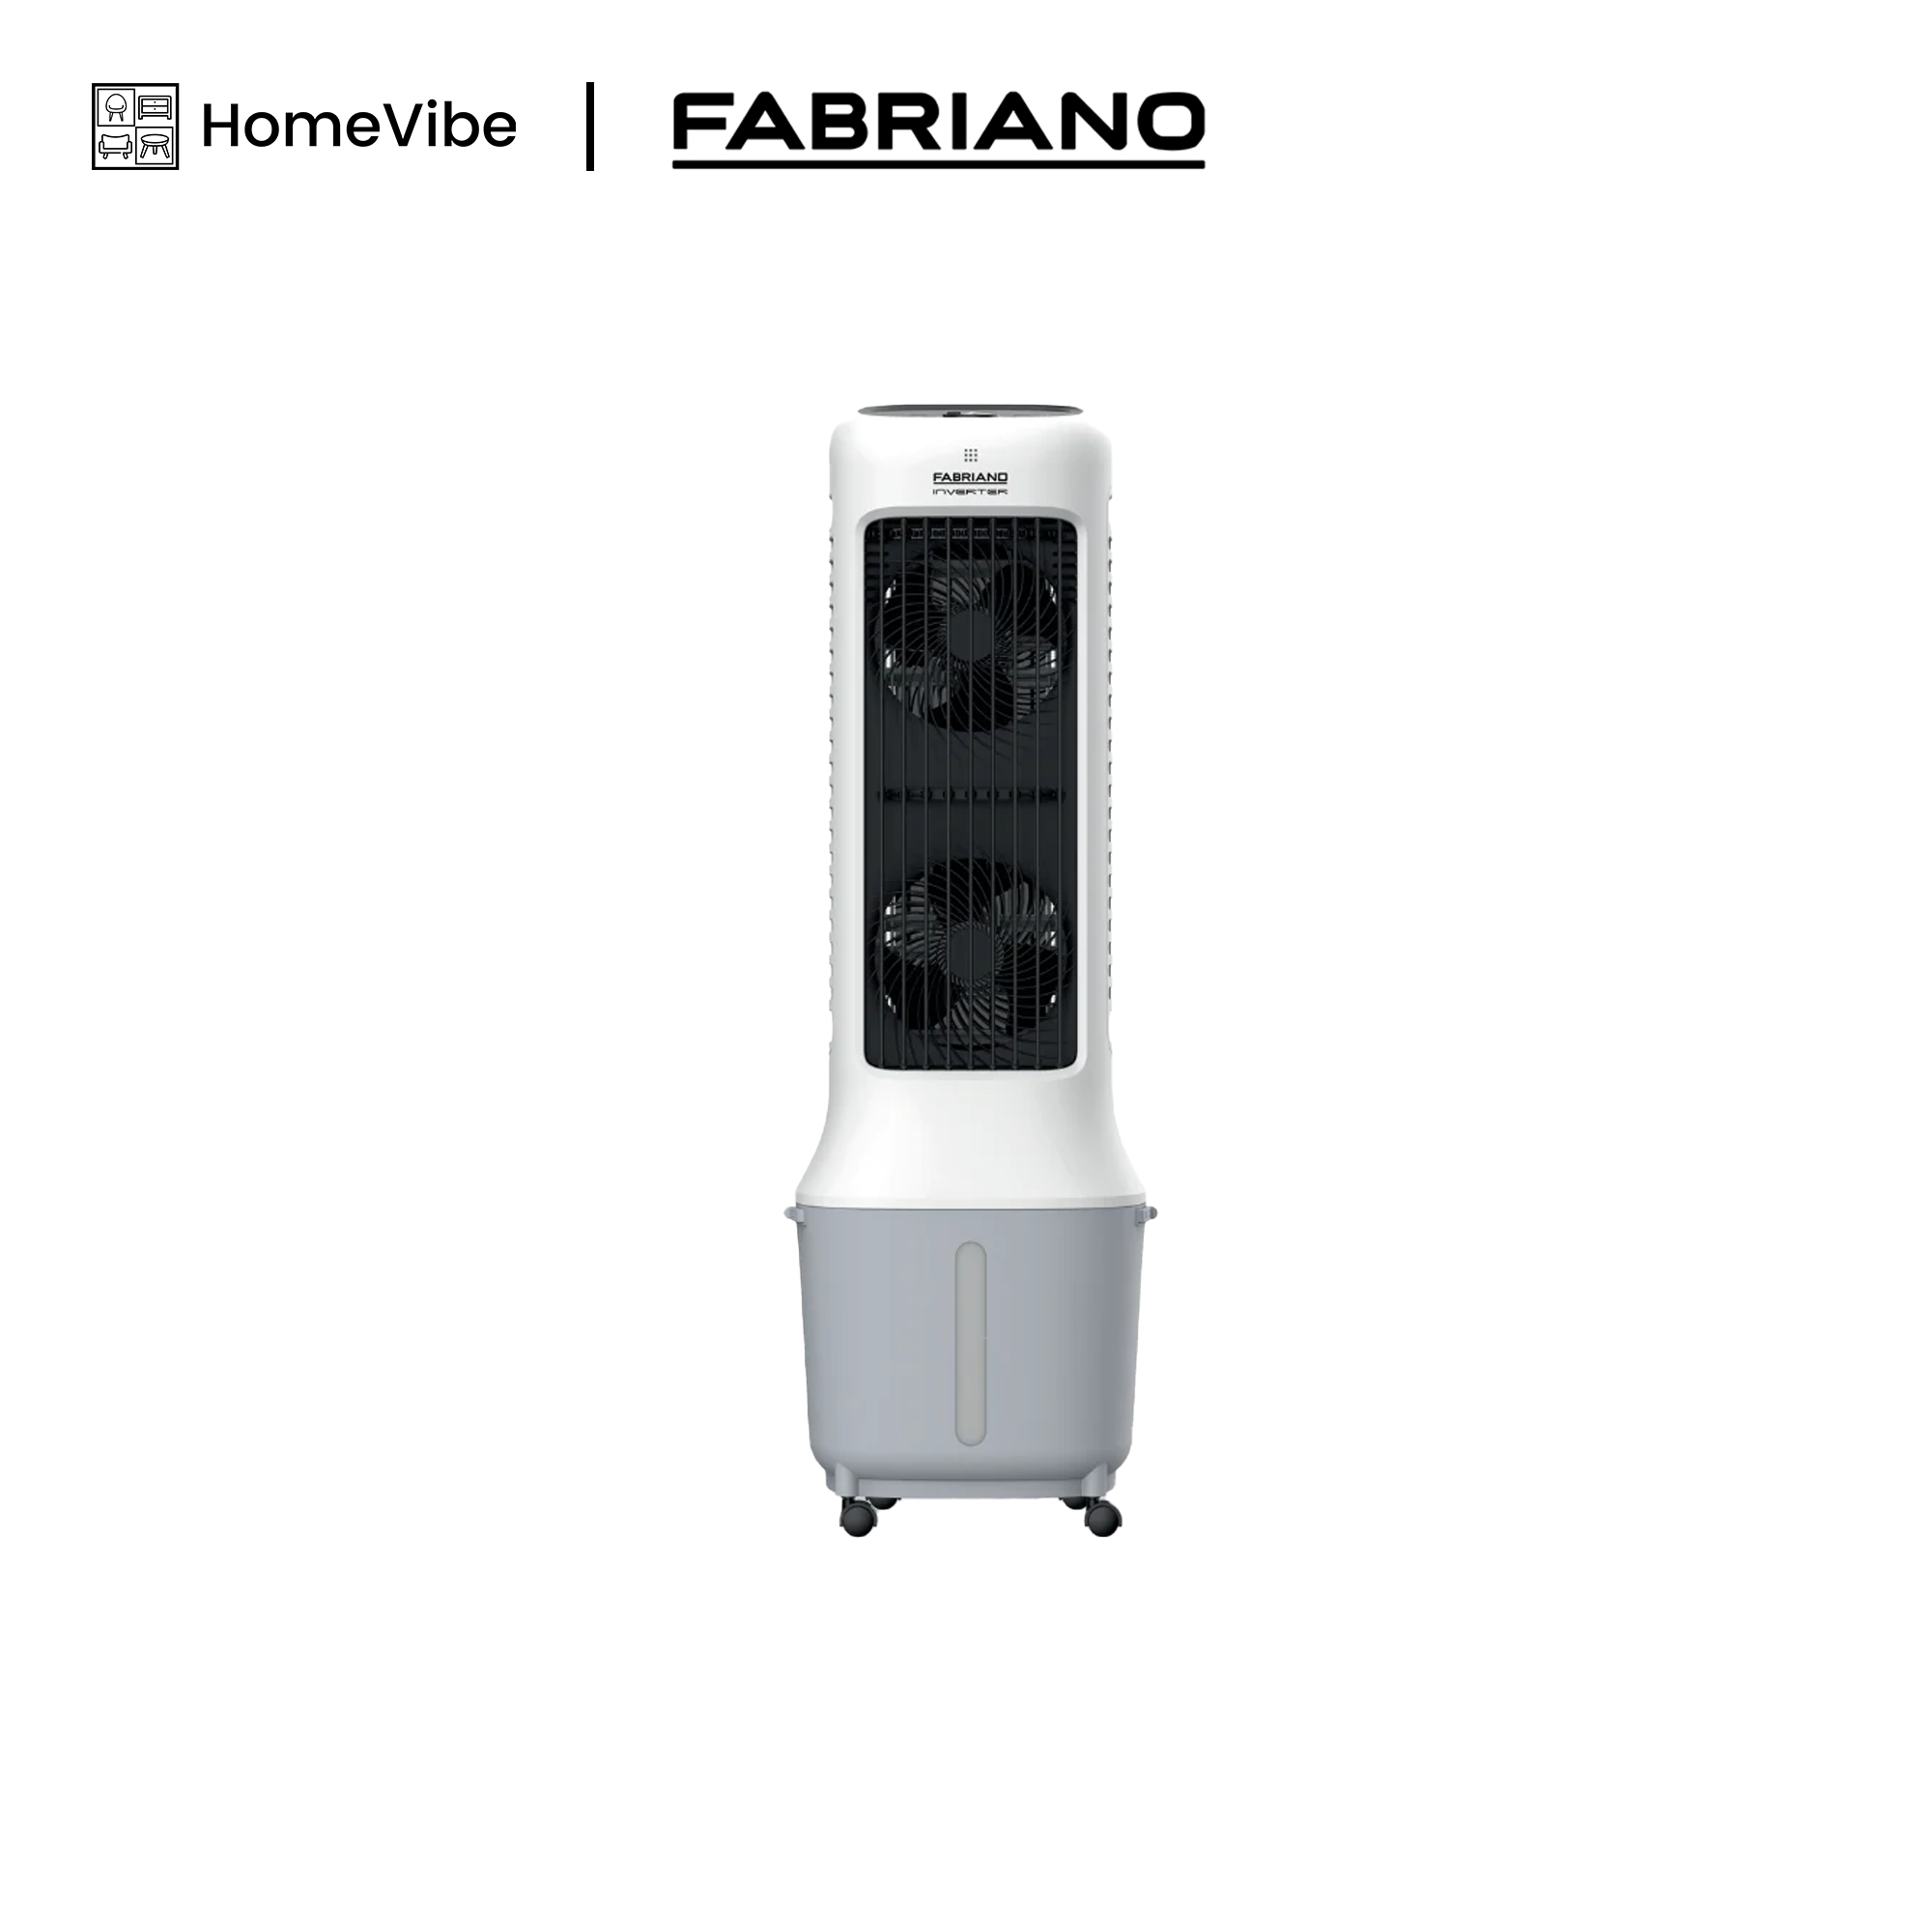 Fabriano 10L INVERTER Air Cooler FACE10SWG-I